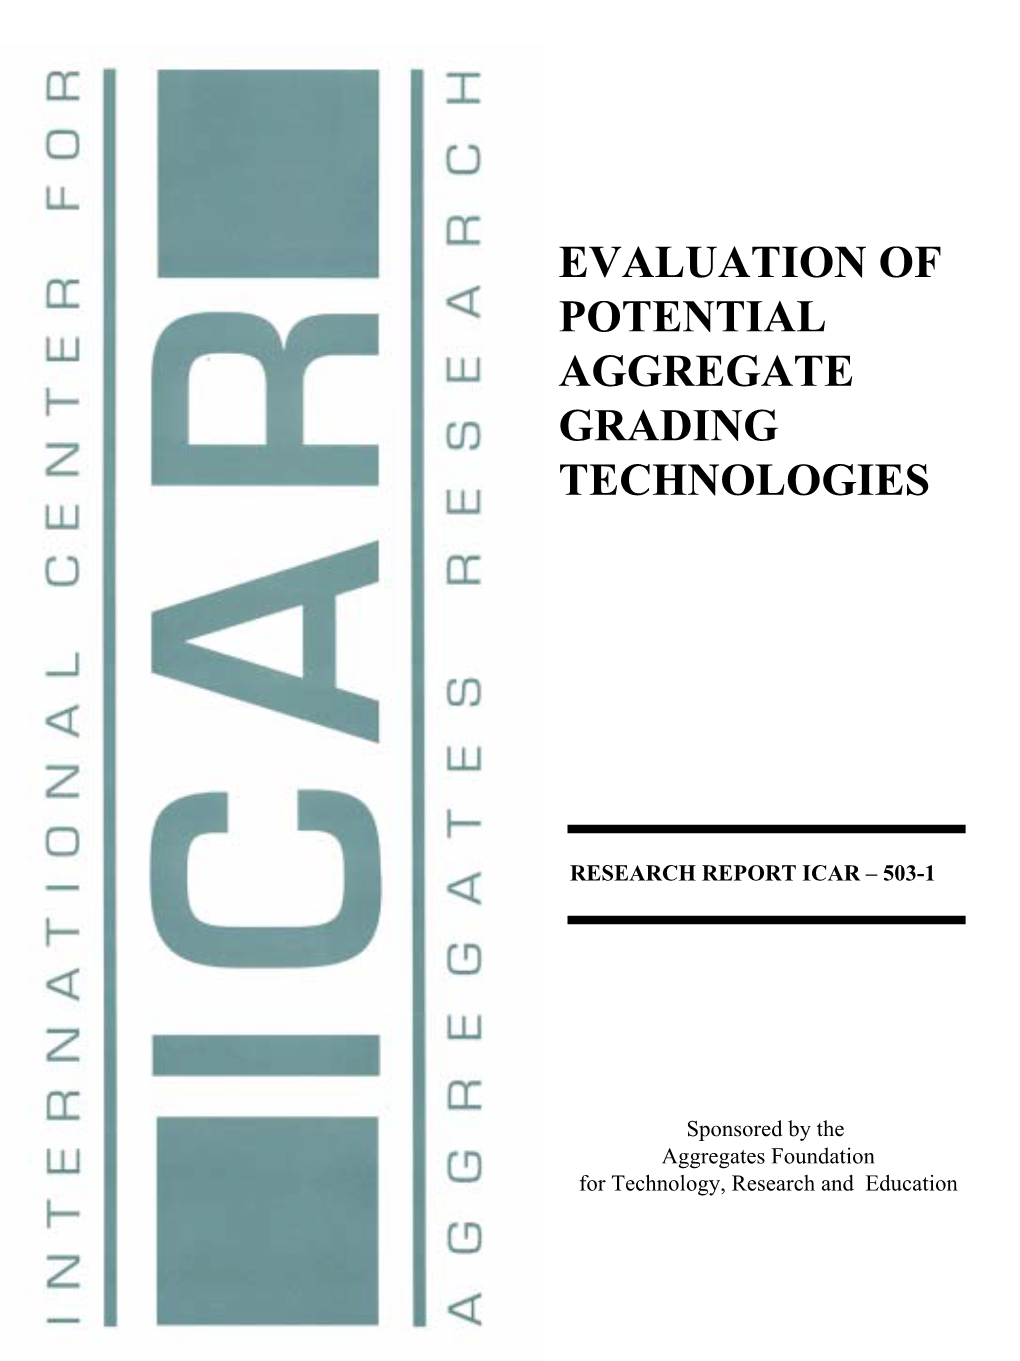 Evaluation of Potential Aggregate Grading Technologies